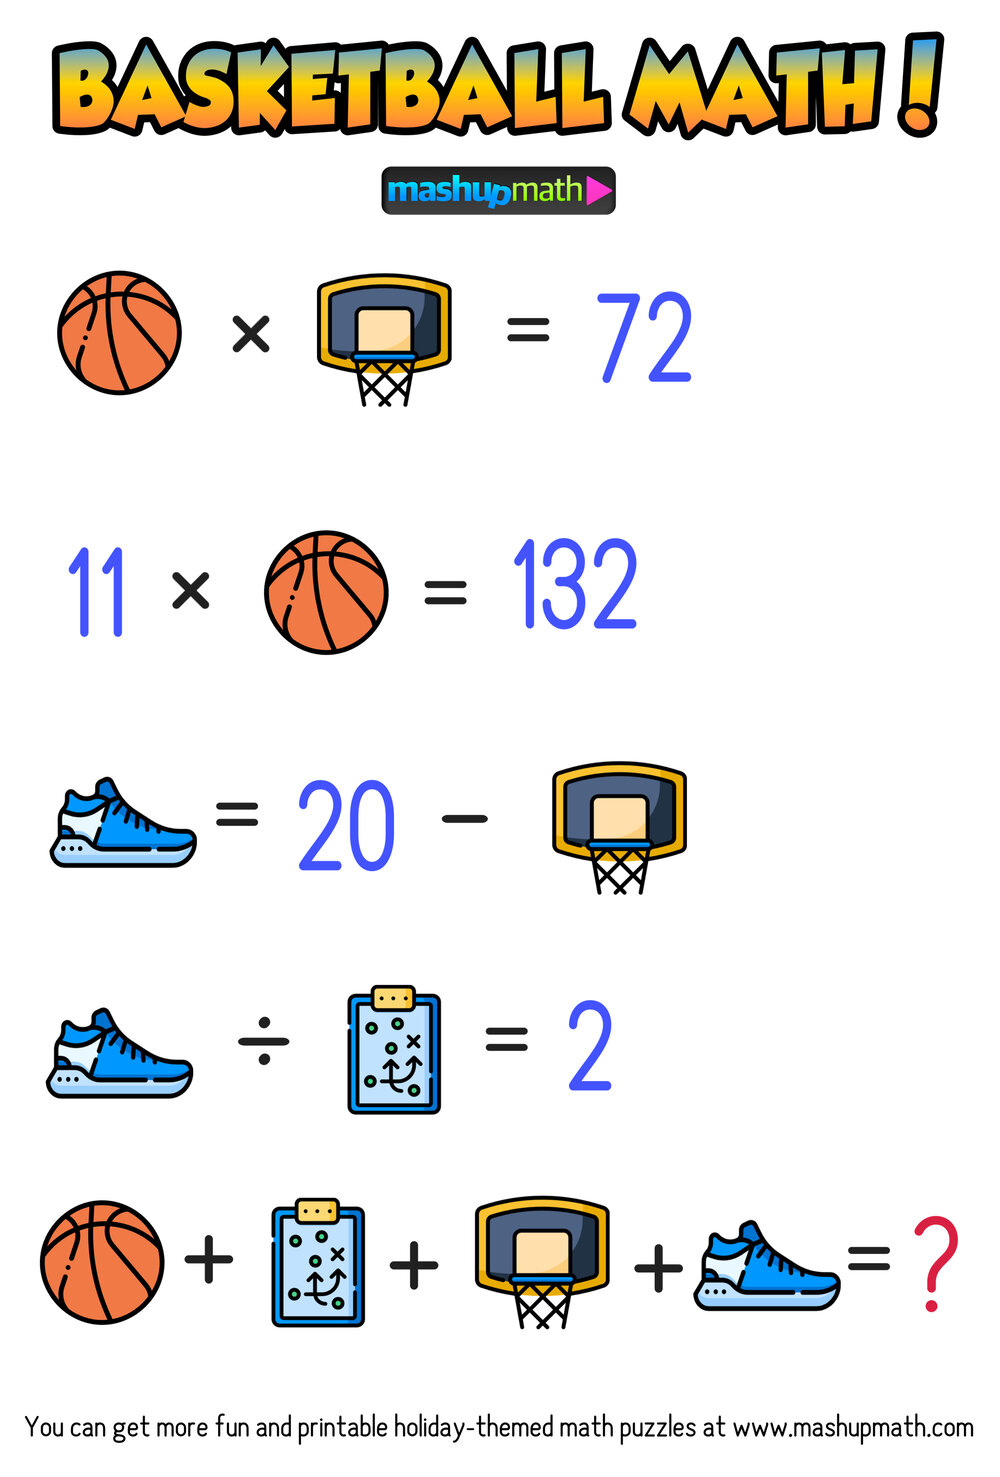 Are Your Kids Ready for These Basketball Math Puzzles? — Mashup Math